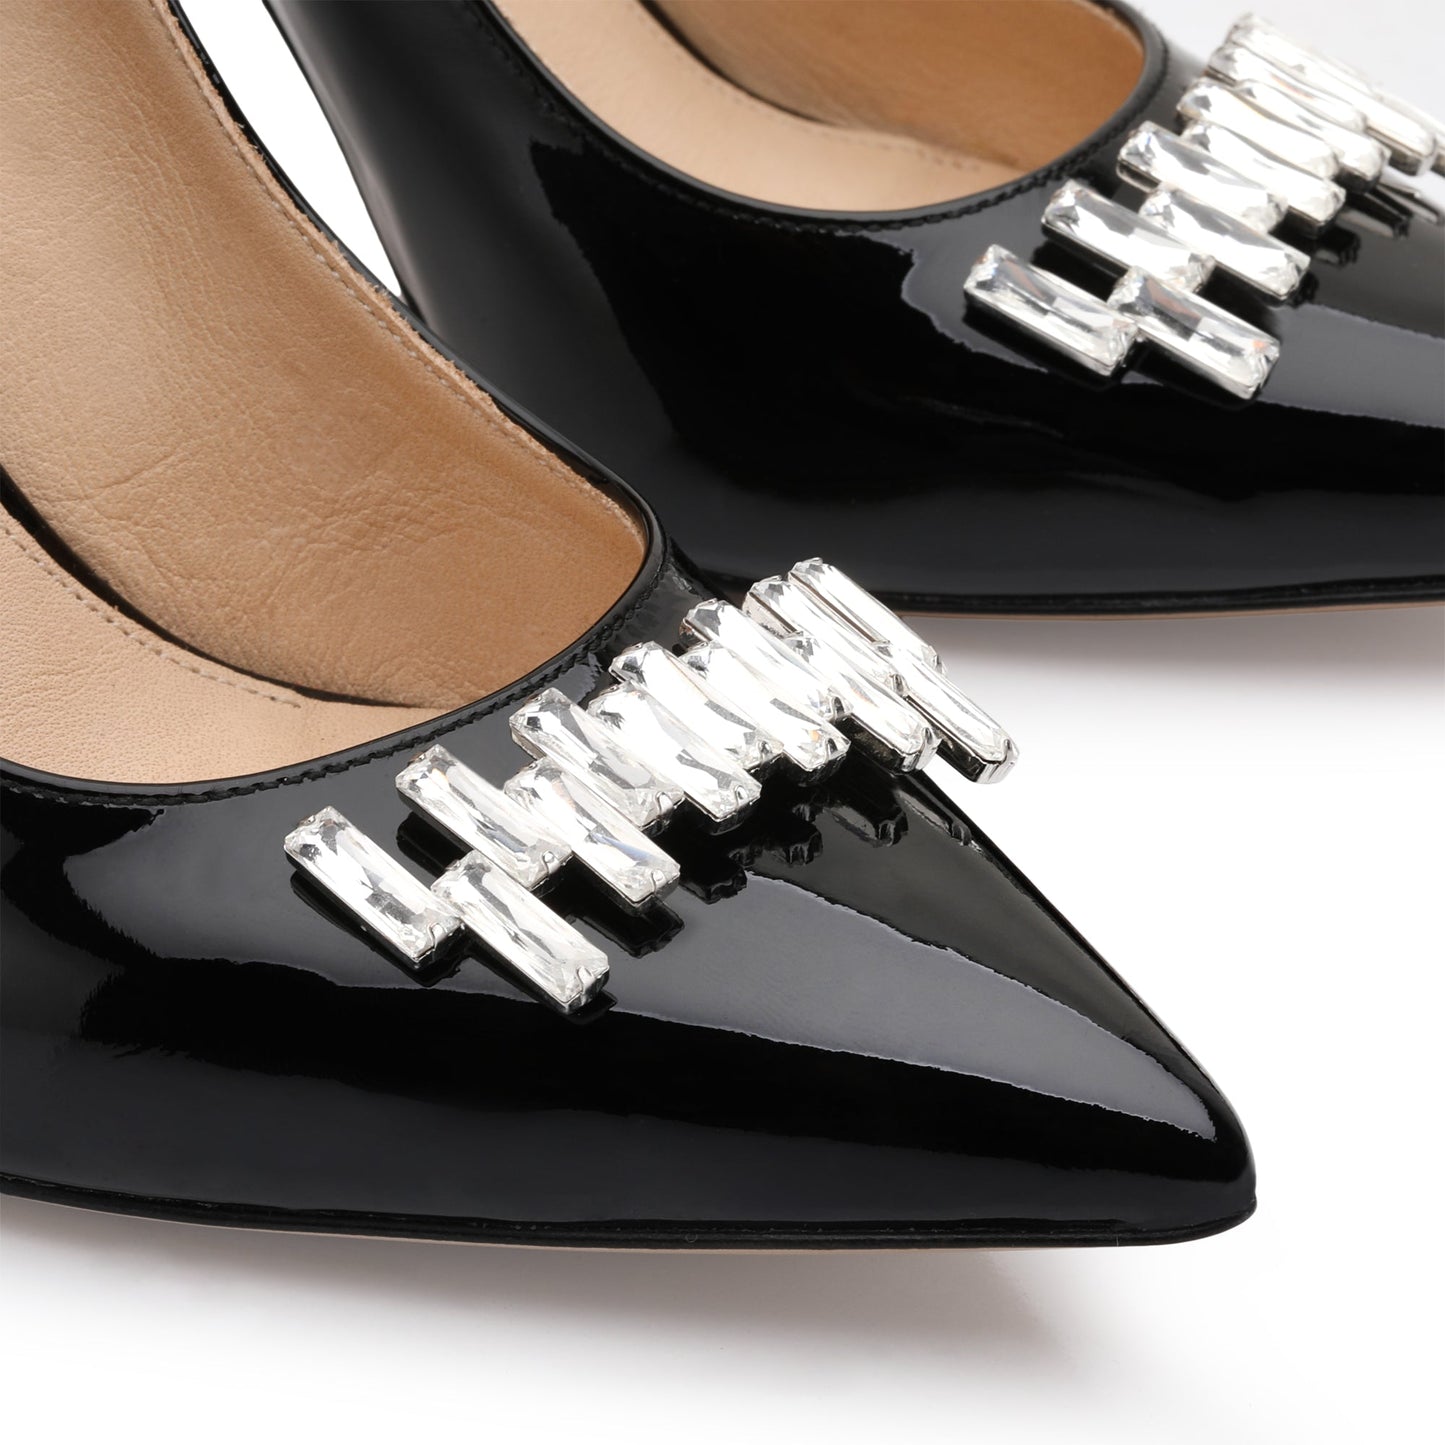 Black pumps with a brooch